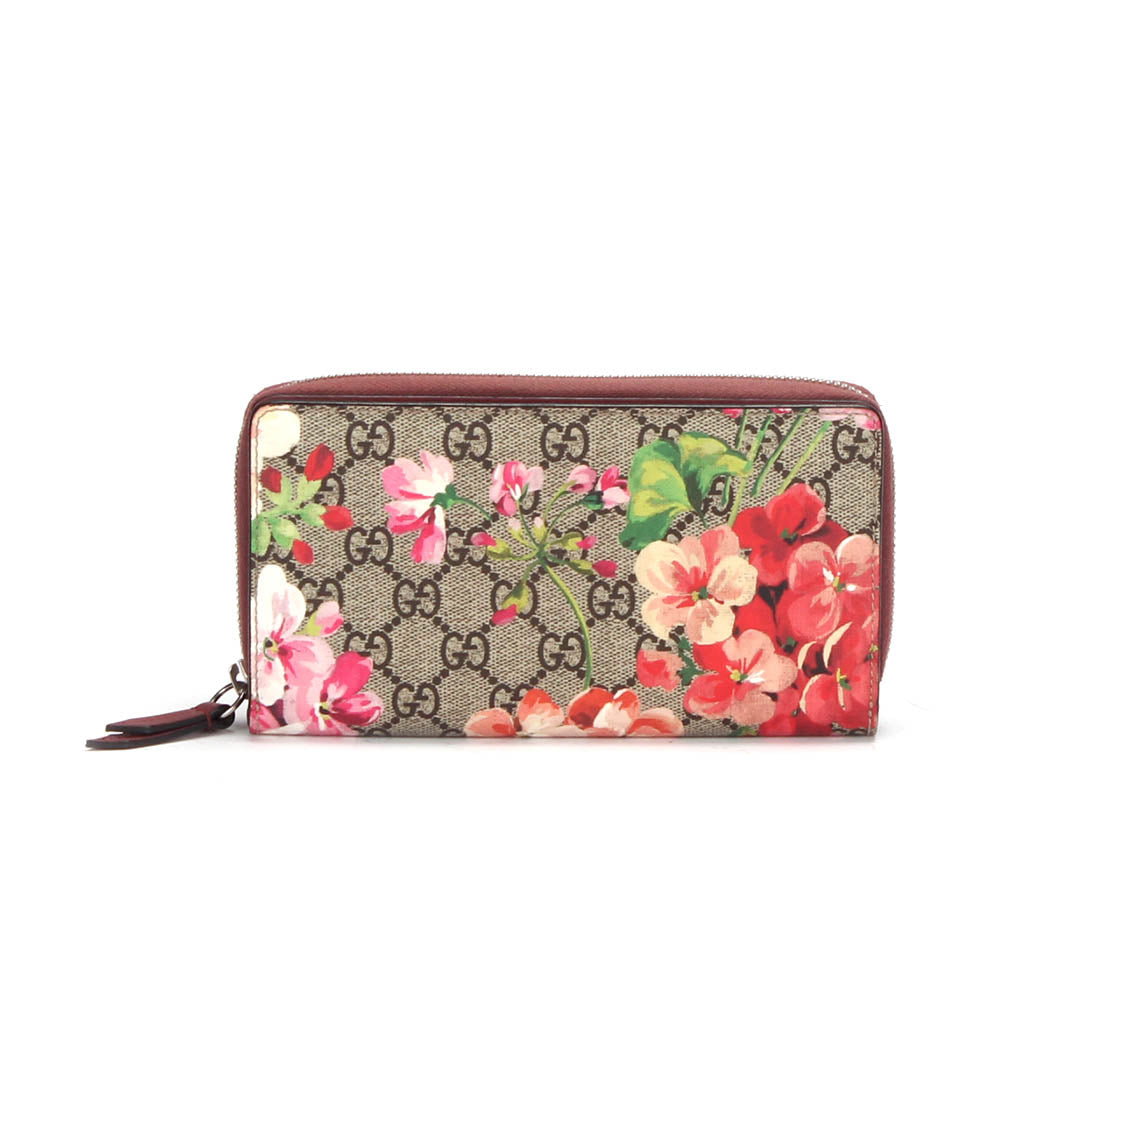 GG Supreme Blooms Continental Wallet 430260